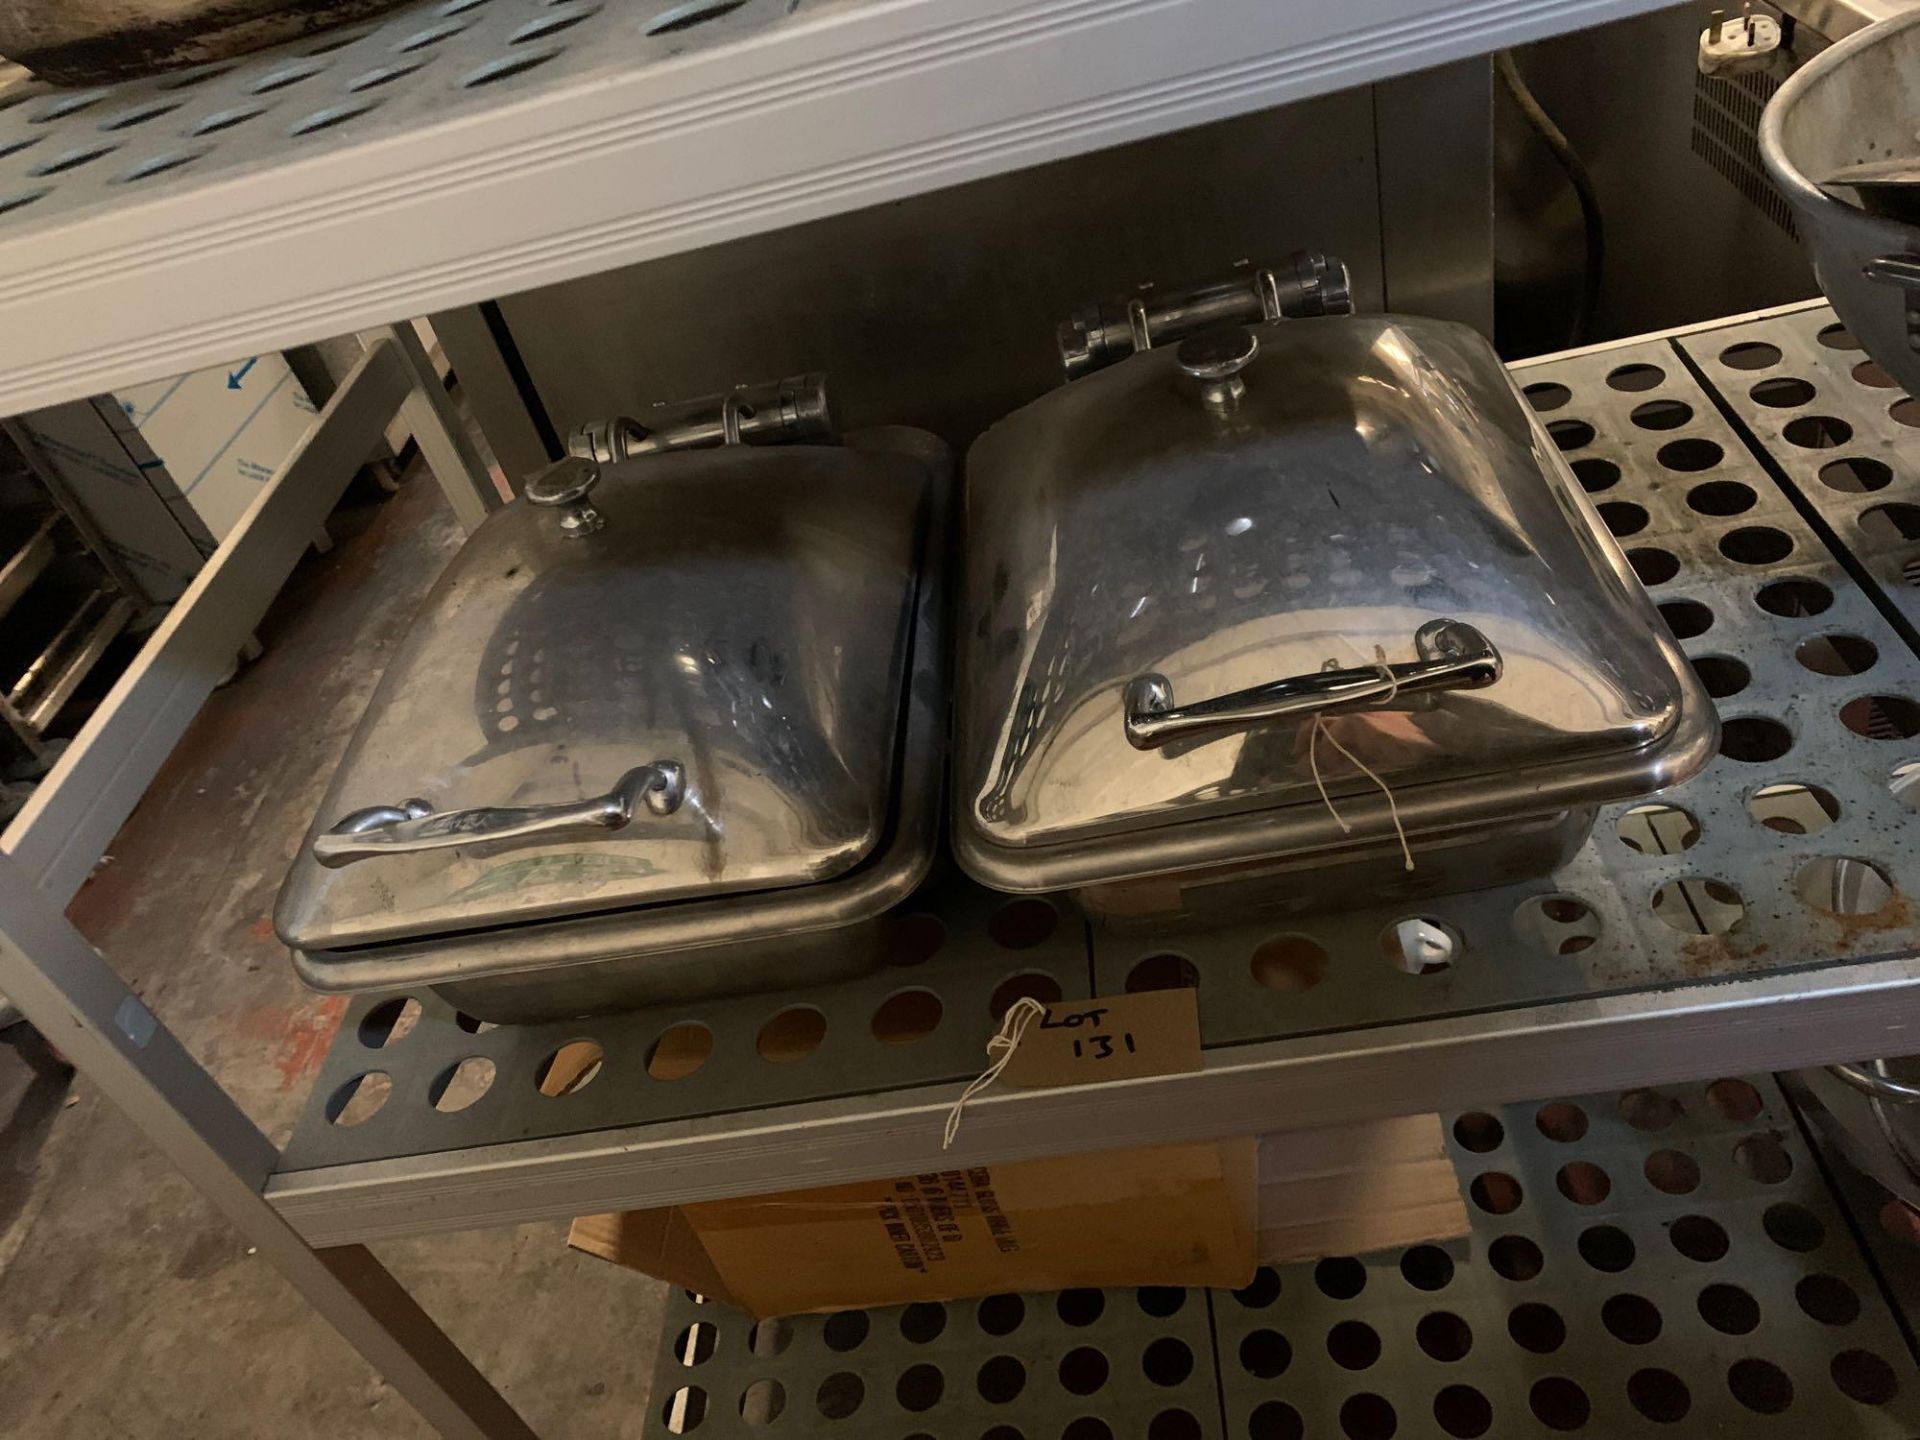 2 x Stainless Steel Chafing Pans With Roll Lid